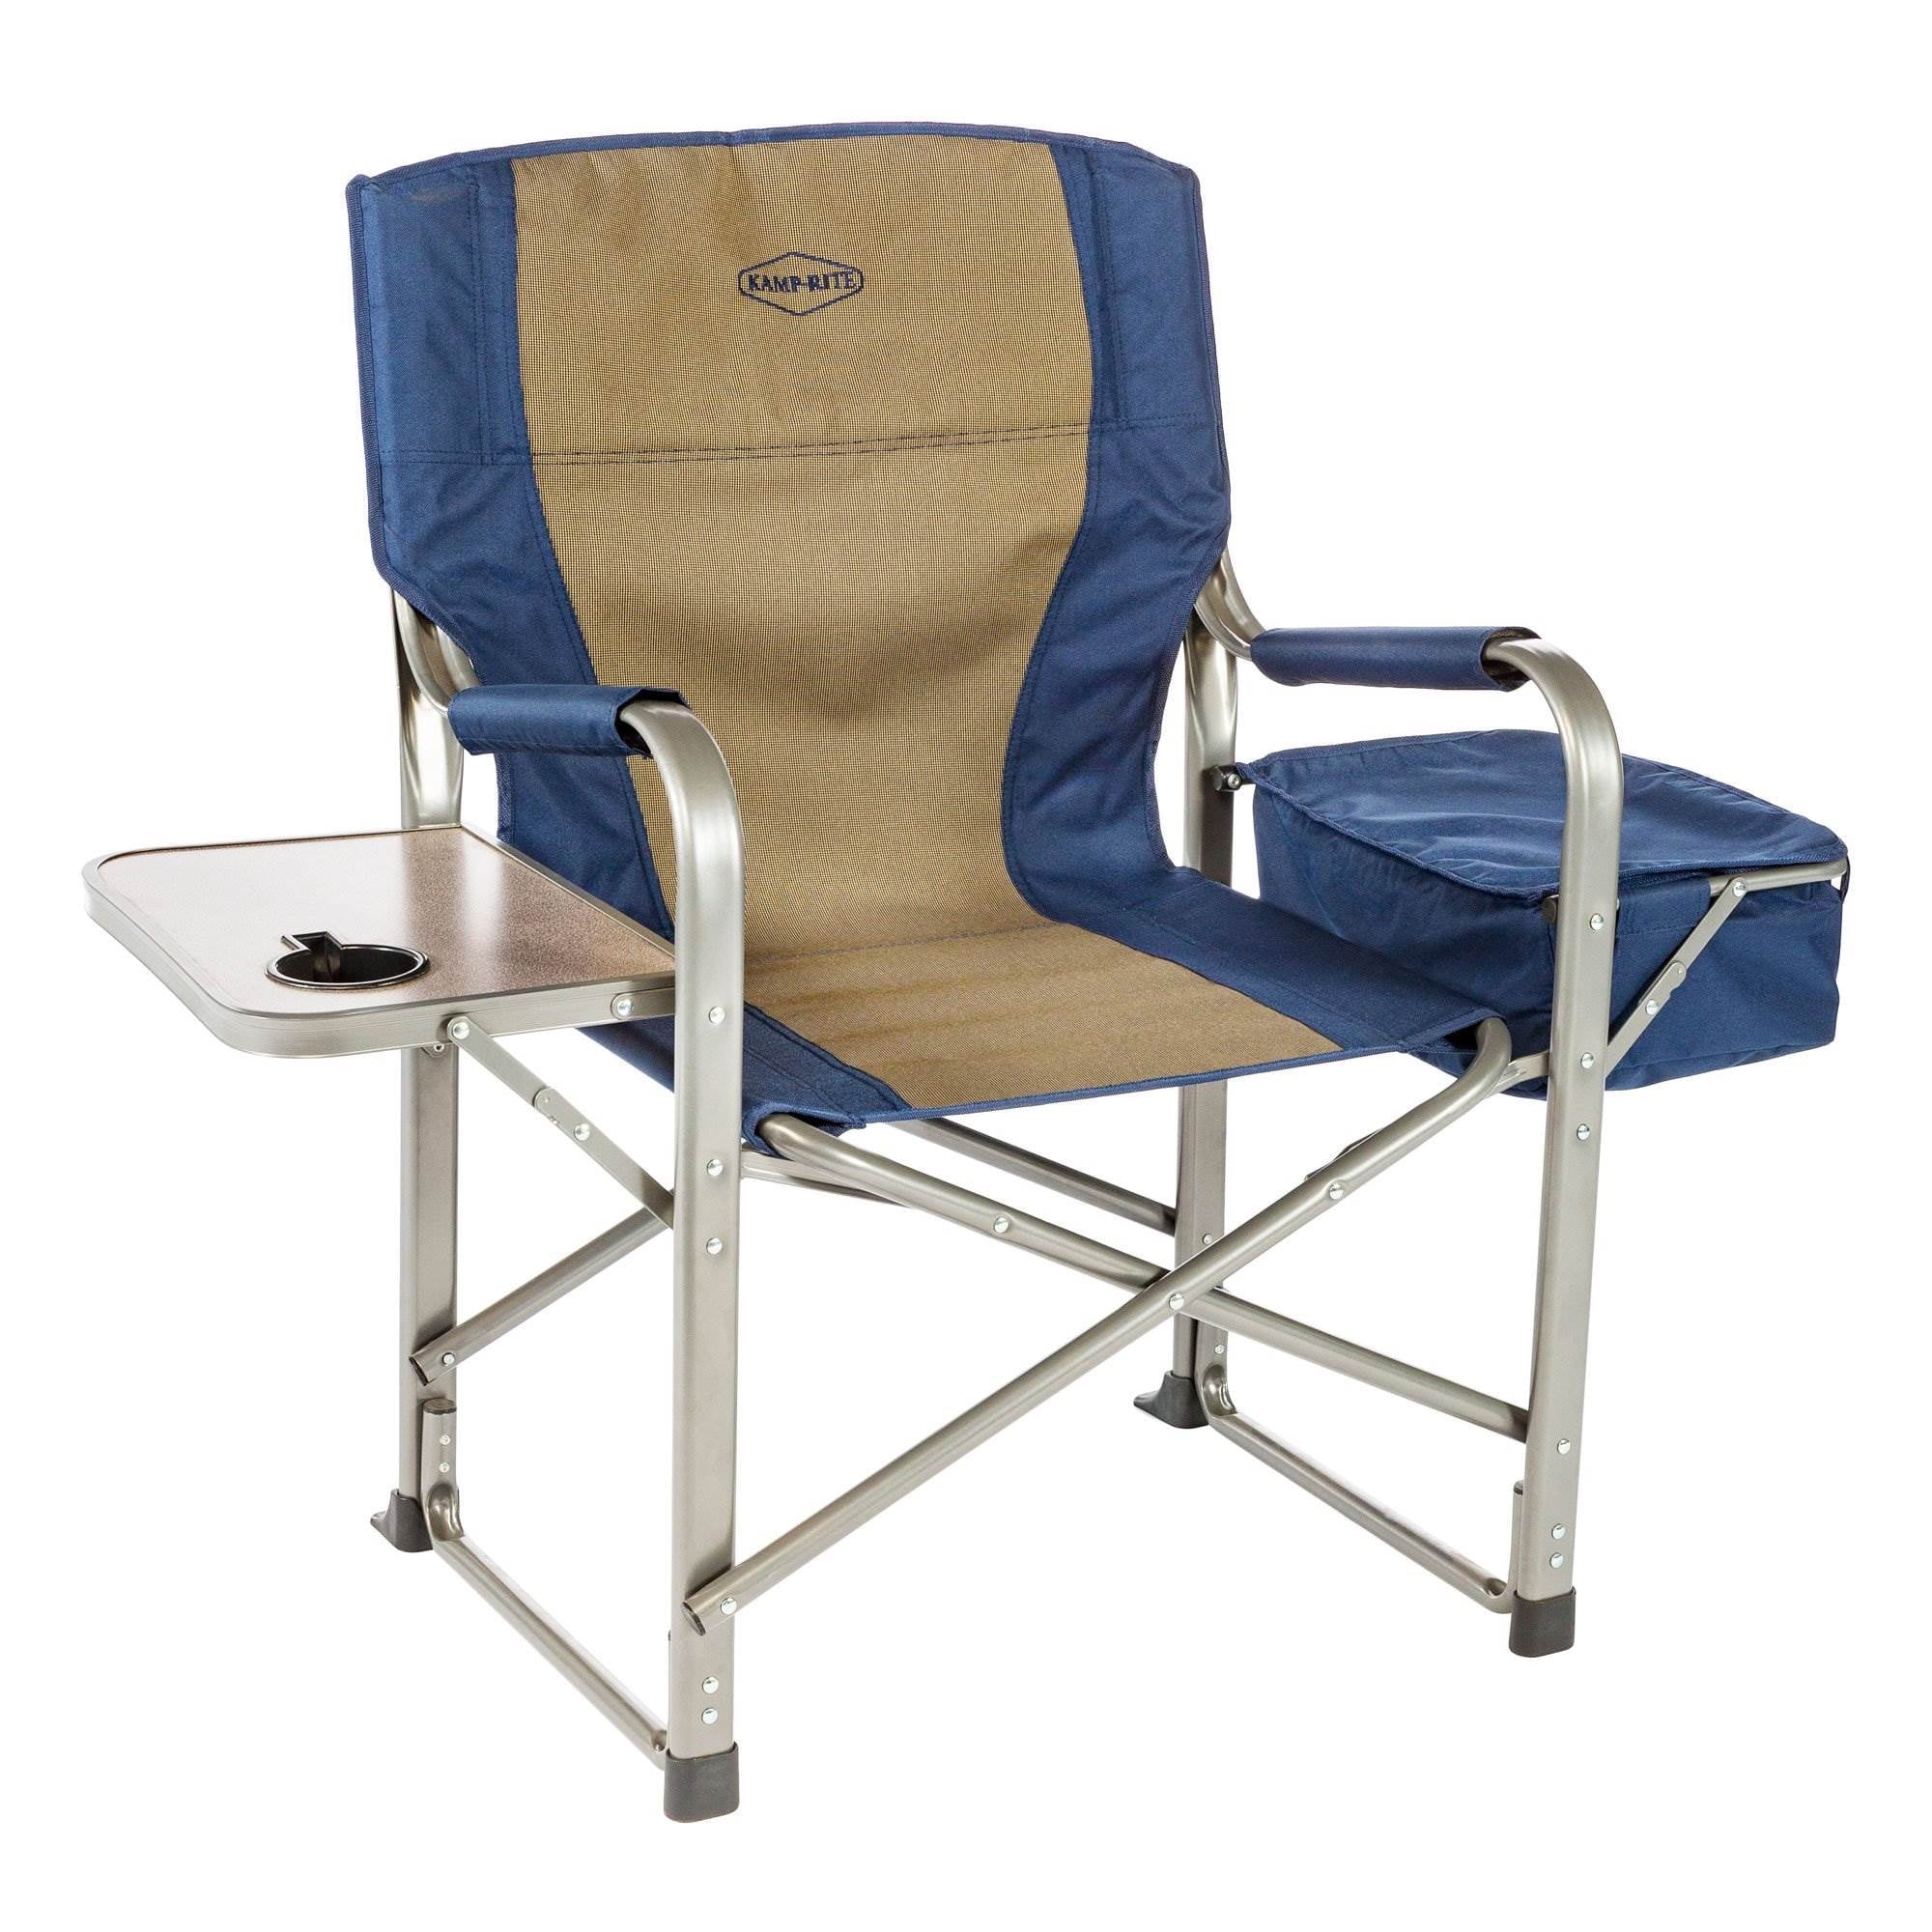 Director Chair Folding Padded Camping Seat with Side Table Drink Holder Blue XXL 